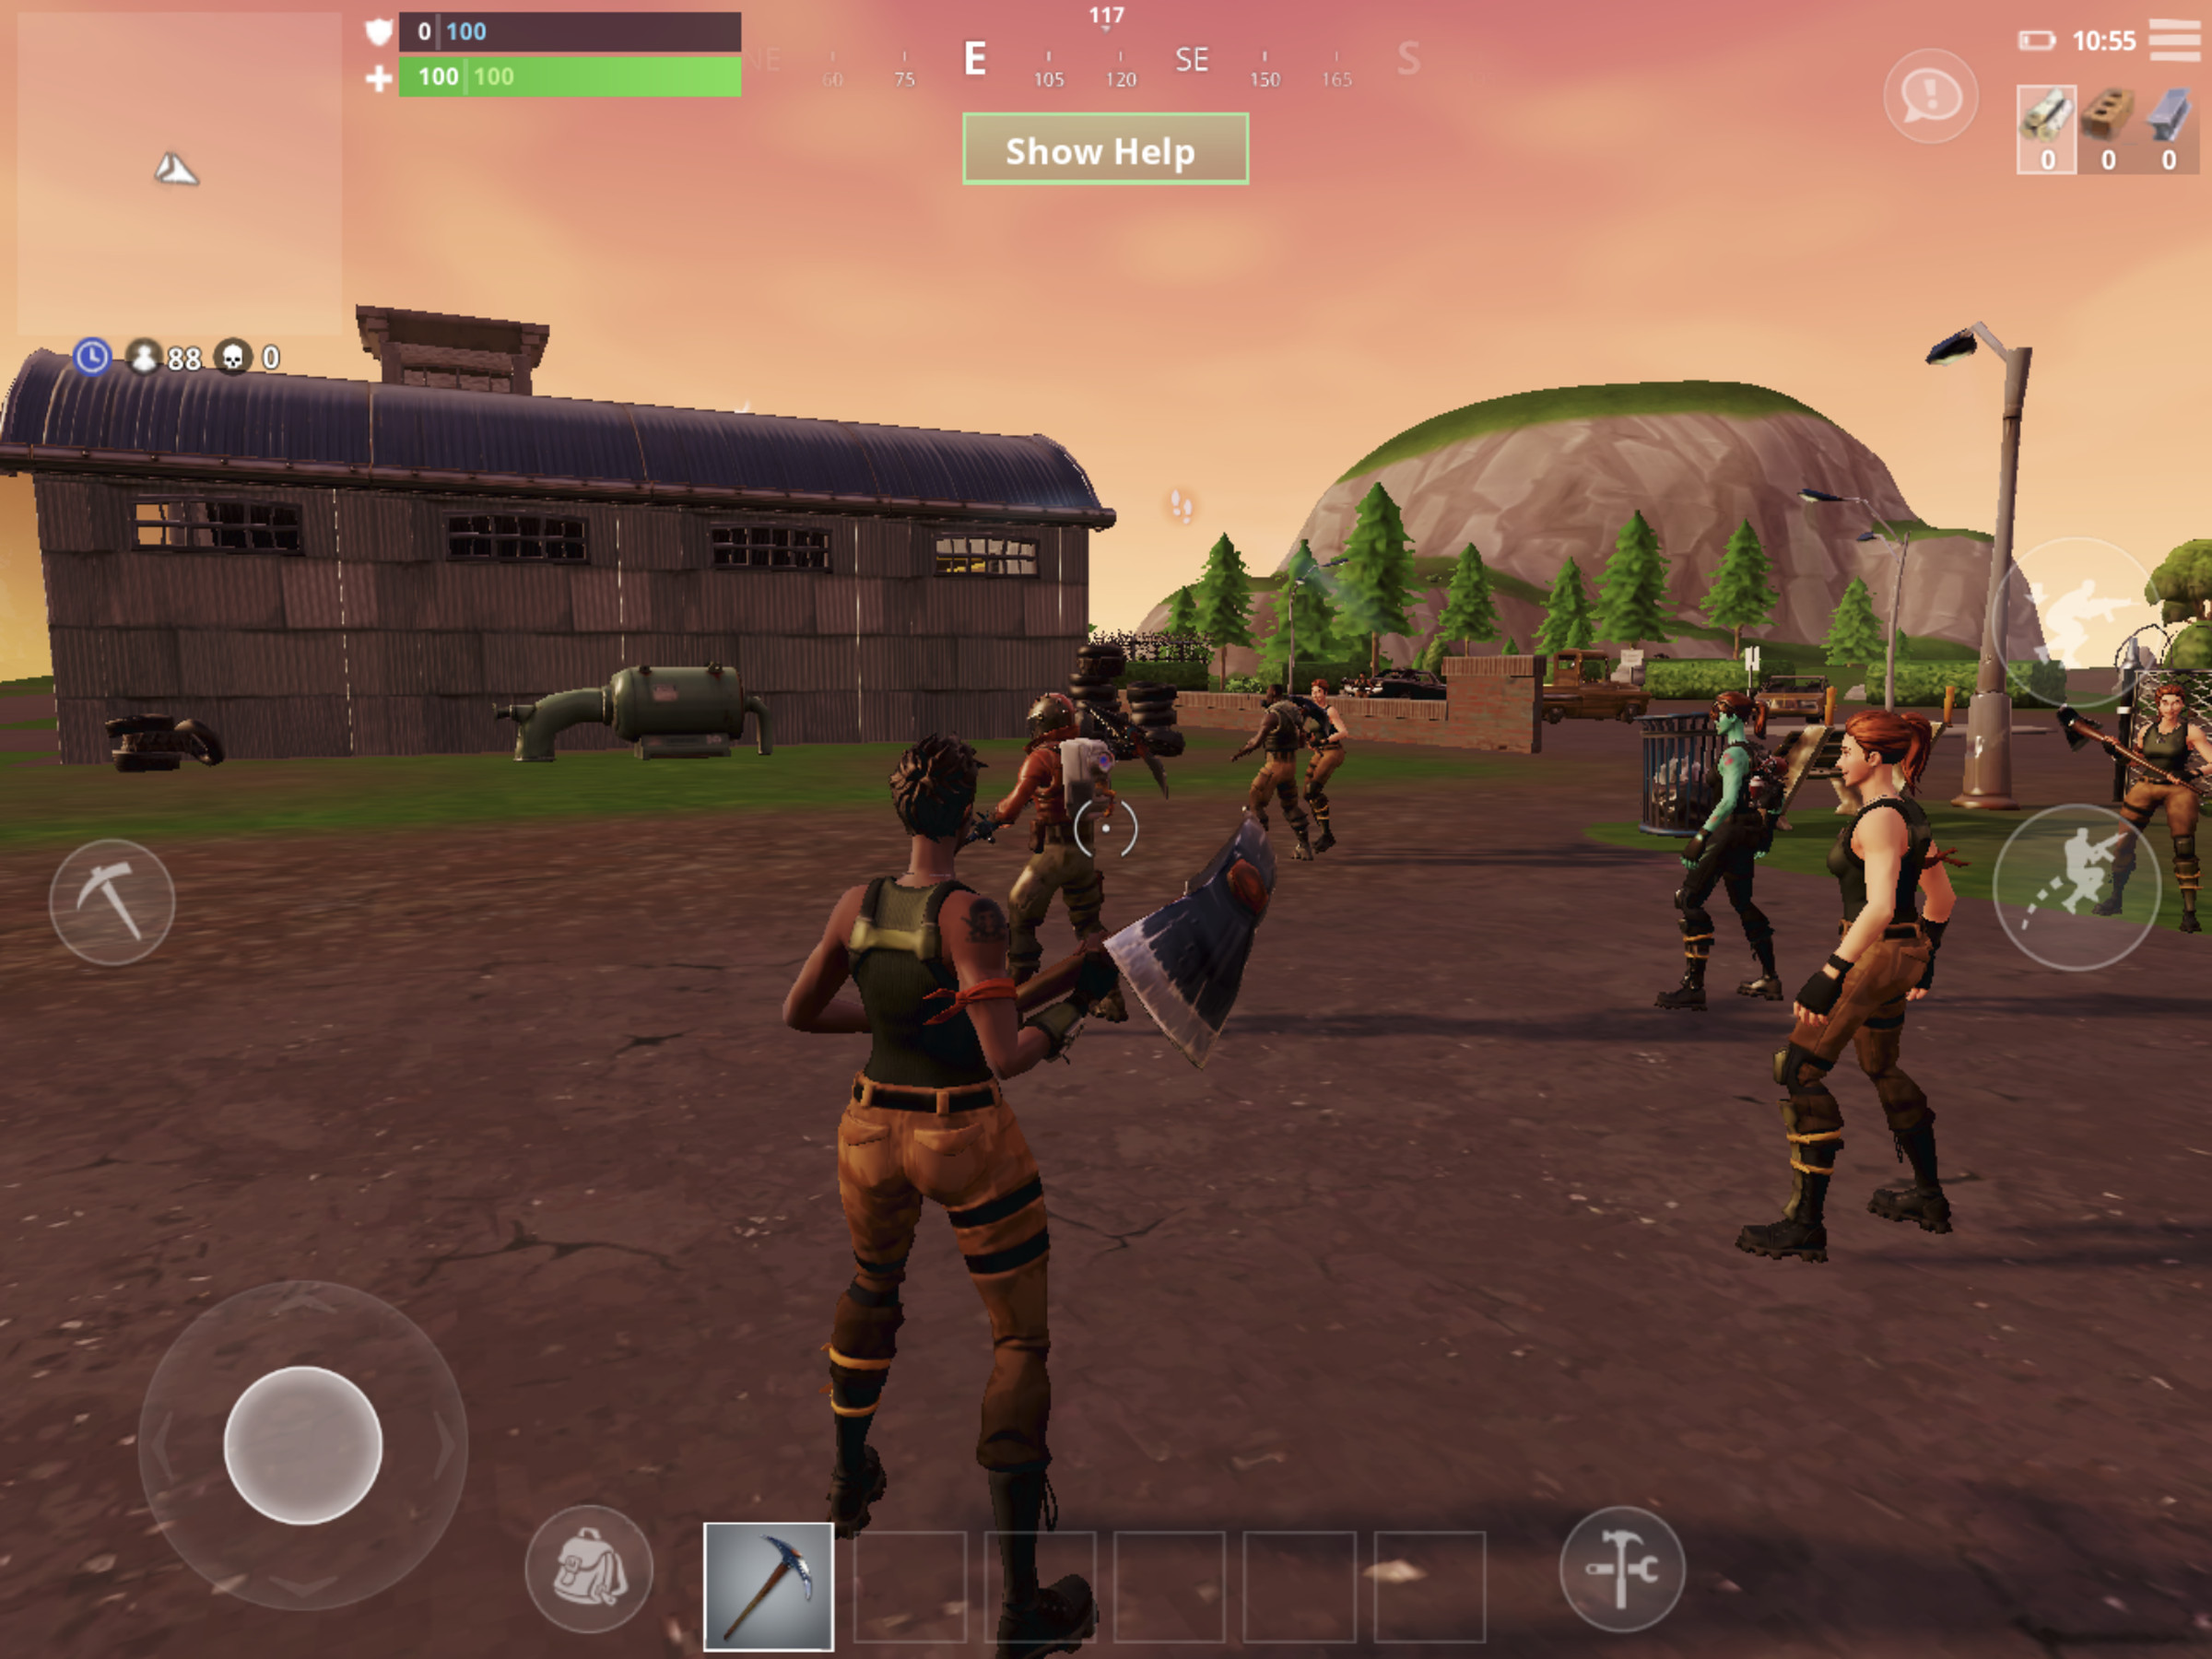 Fornite on an iPad Pro